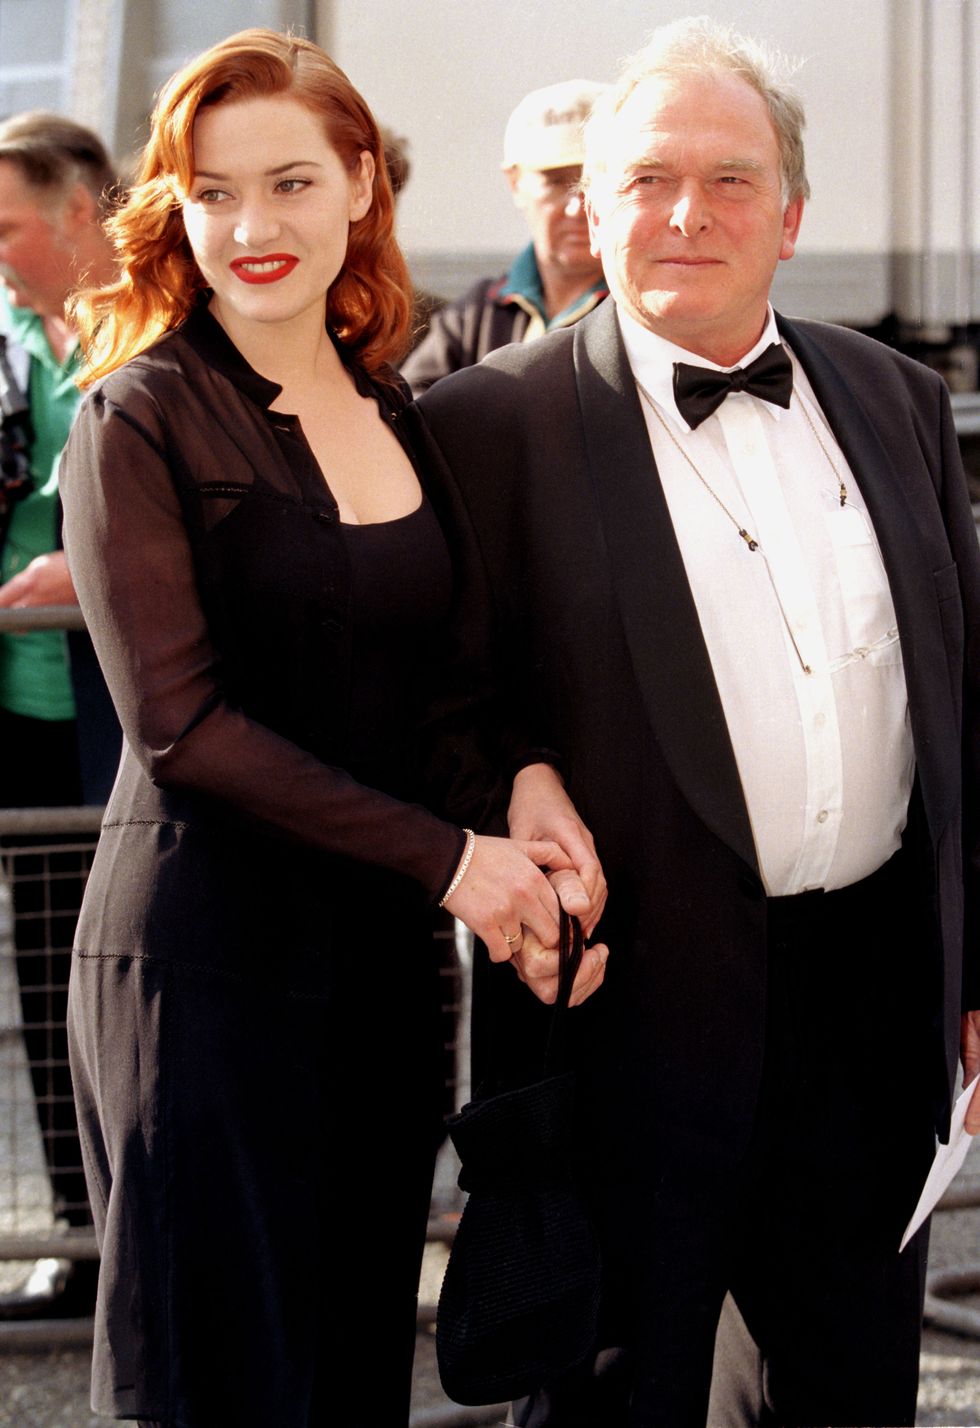 kate winslet father roger attend the 1997 bafta british academy film television awards at londons royal albert hall photo by antony jonesjustin goff\uk press via getty images